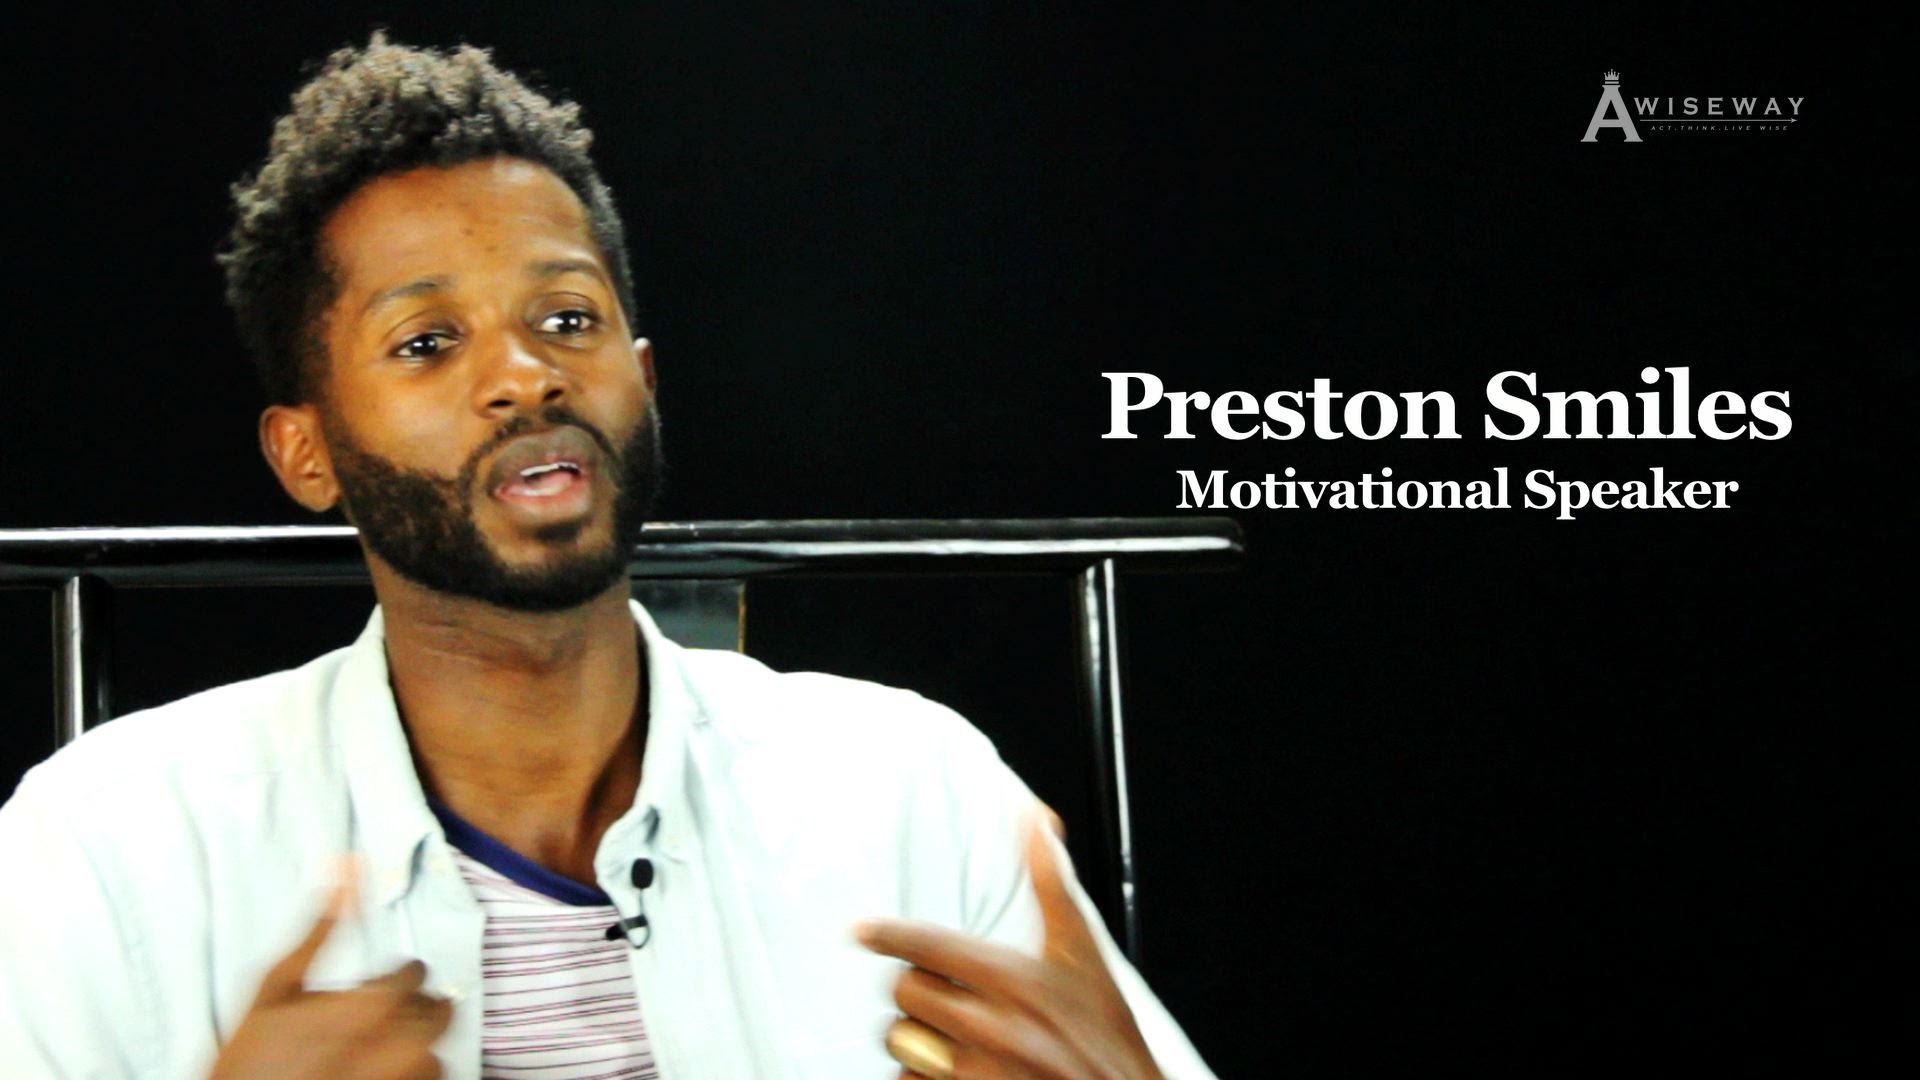 Preston Smiles Offers Advice For a Successful Relationship